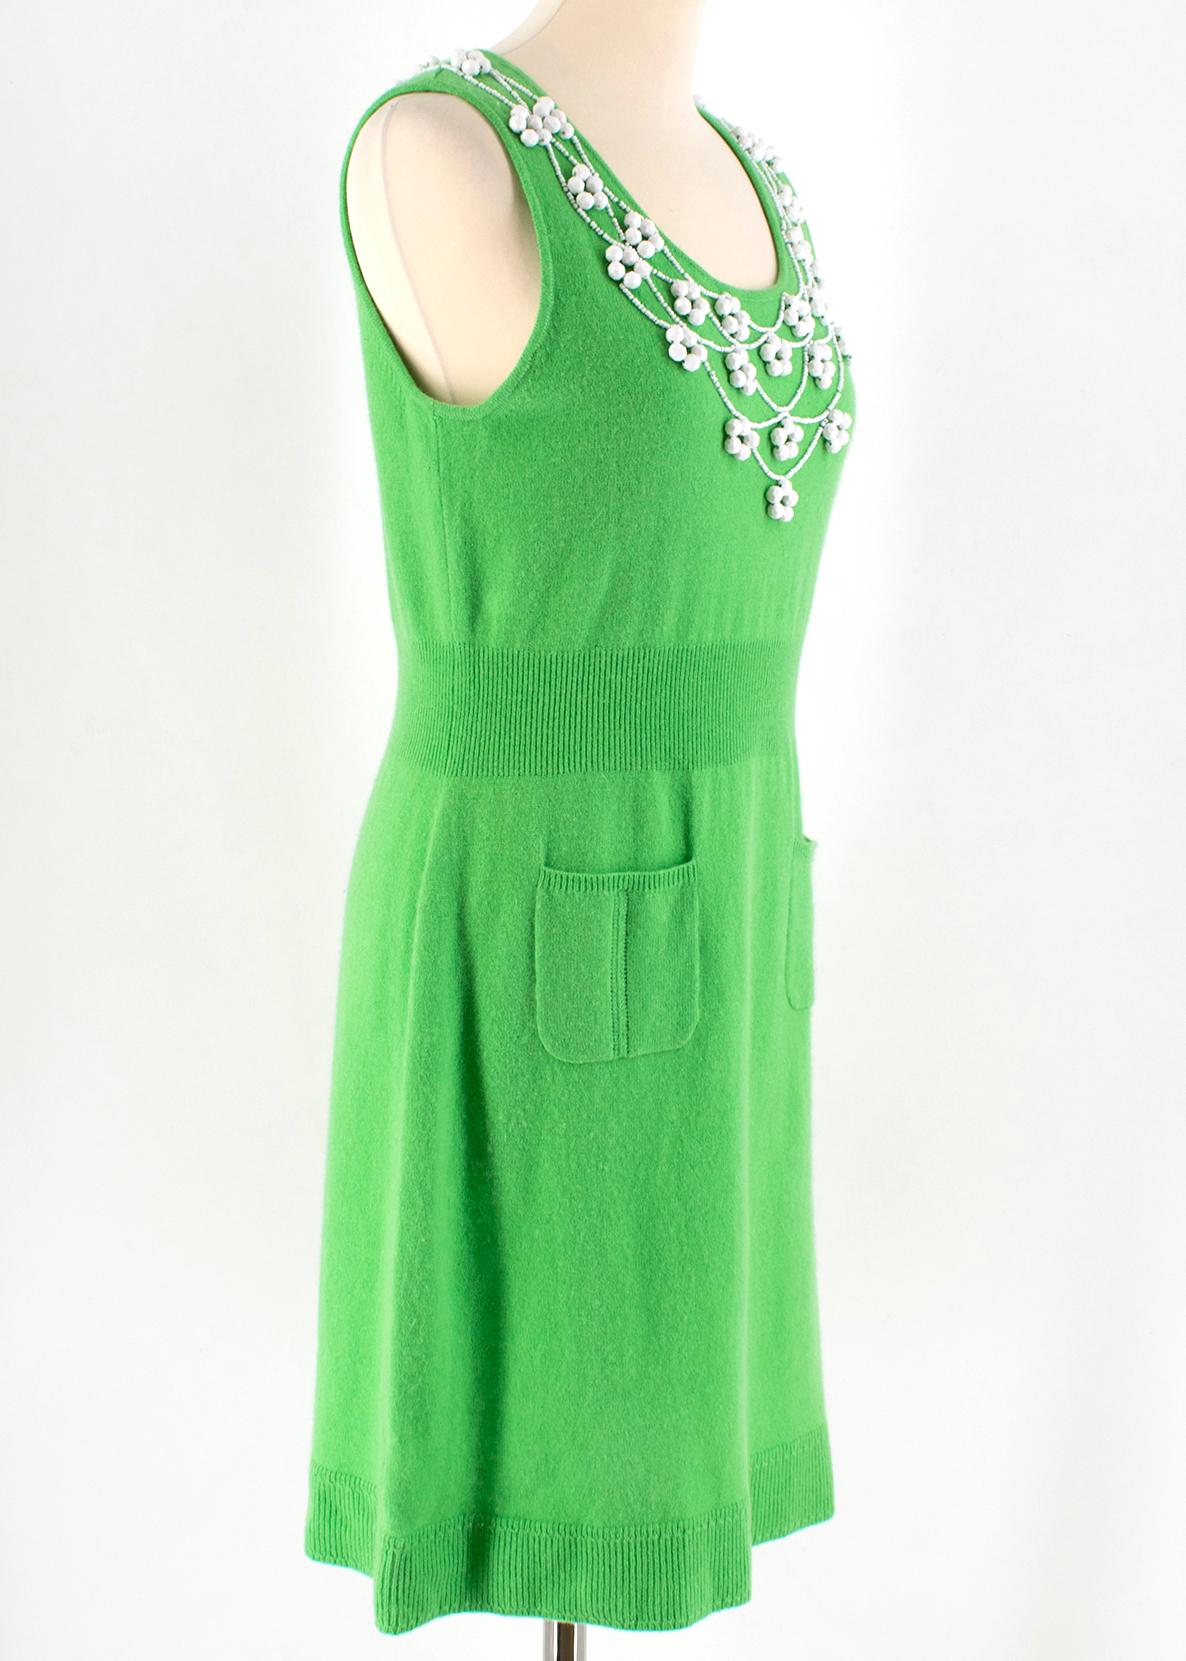 Milly Green Cashmere Embellished Dress

- green cashmere dress
- sleeveless
- round neckline 
- white bead embellished to the neckline 
- ribbed waist and trim 
- two front slip pockets 
- pull on  

Please note, these items are pre-owned and may